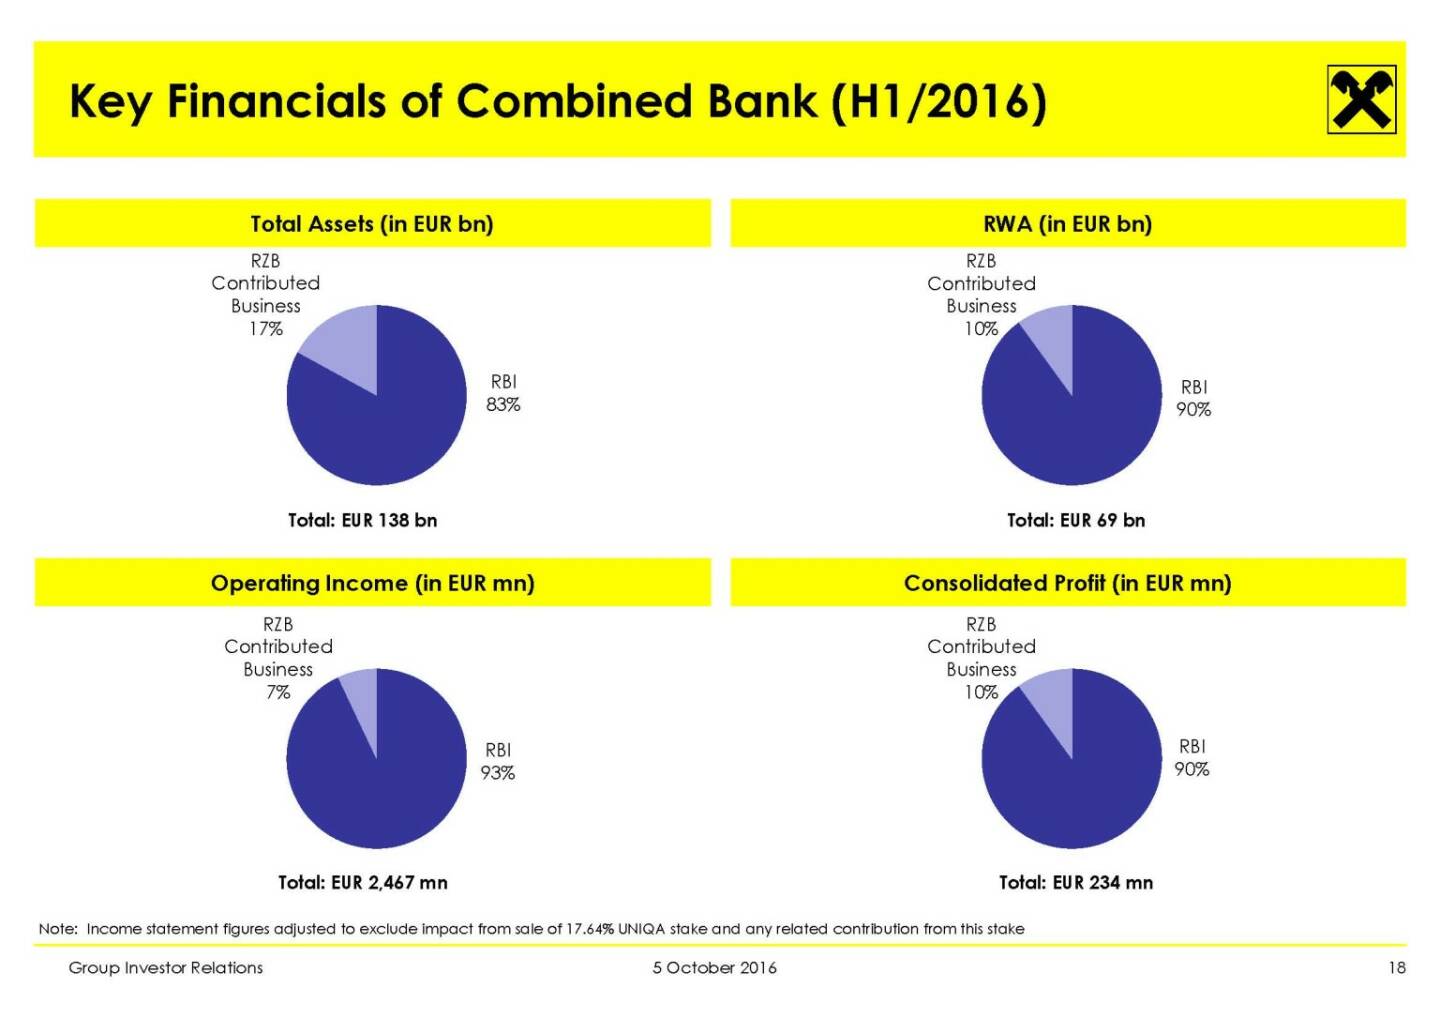 RBI - Key Financials of Combined Bank (H1/2016)